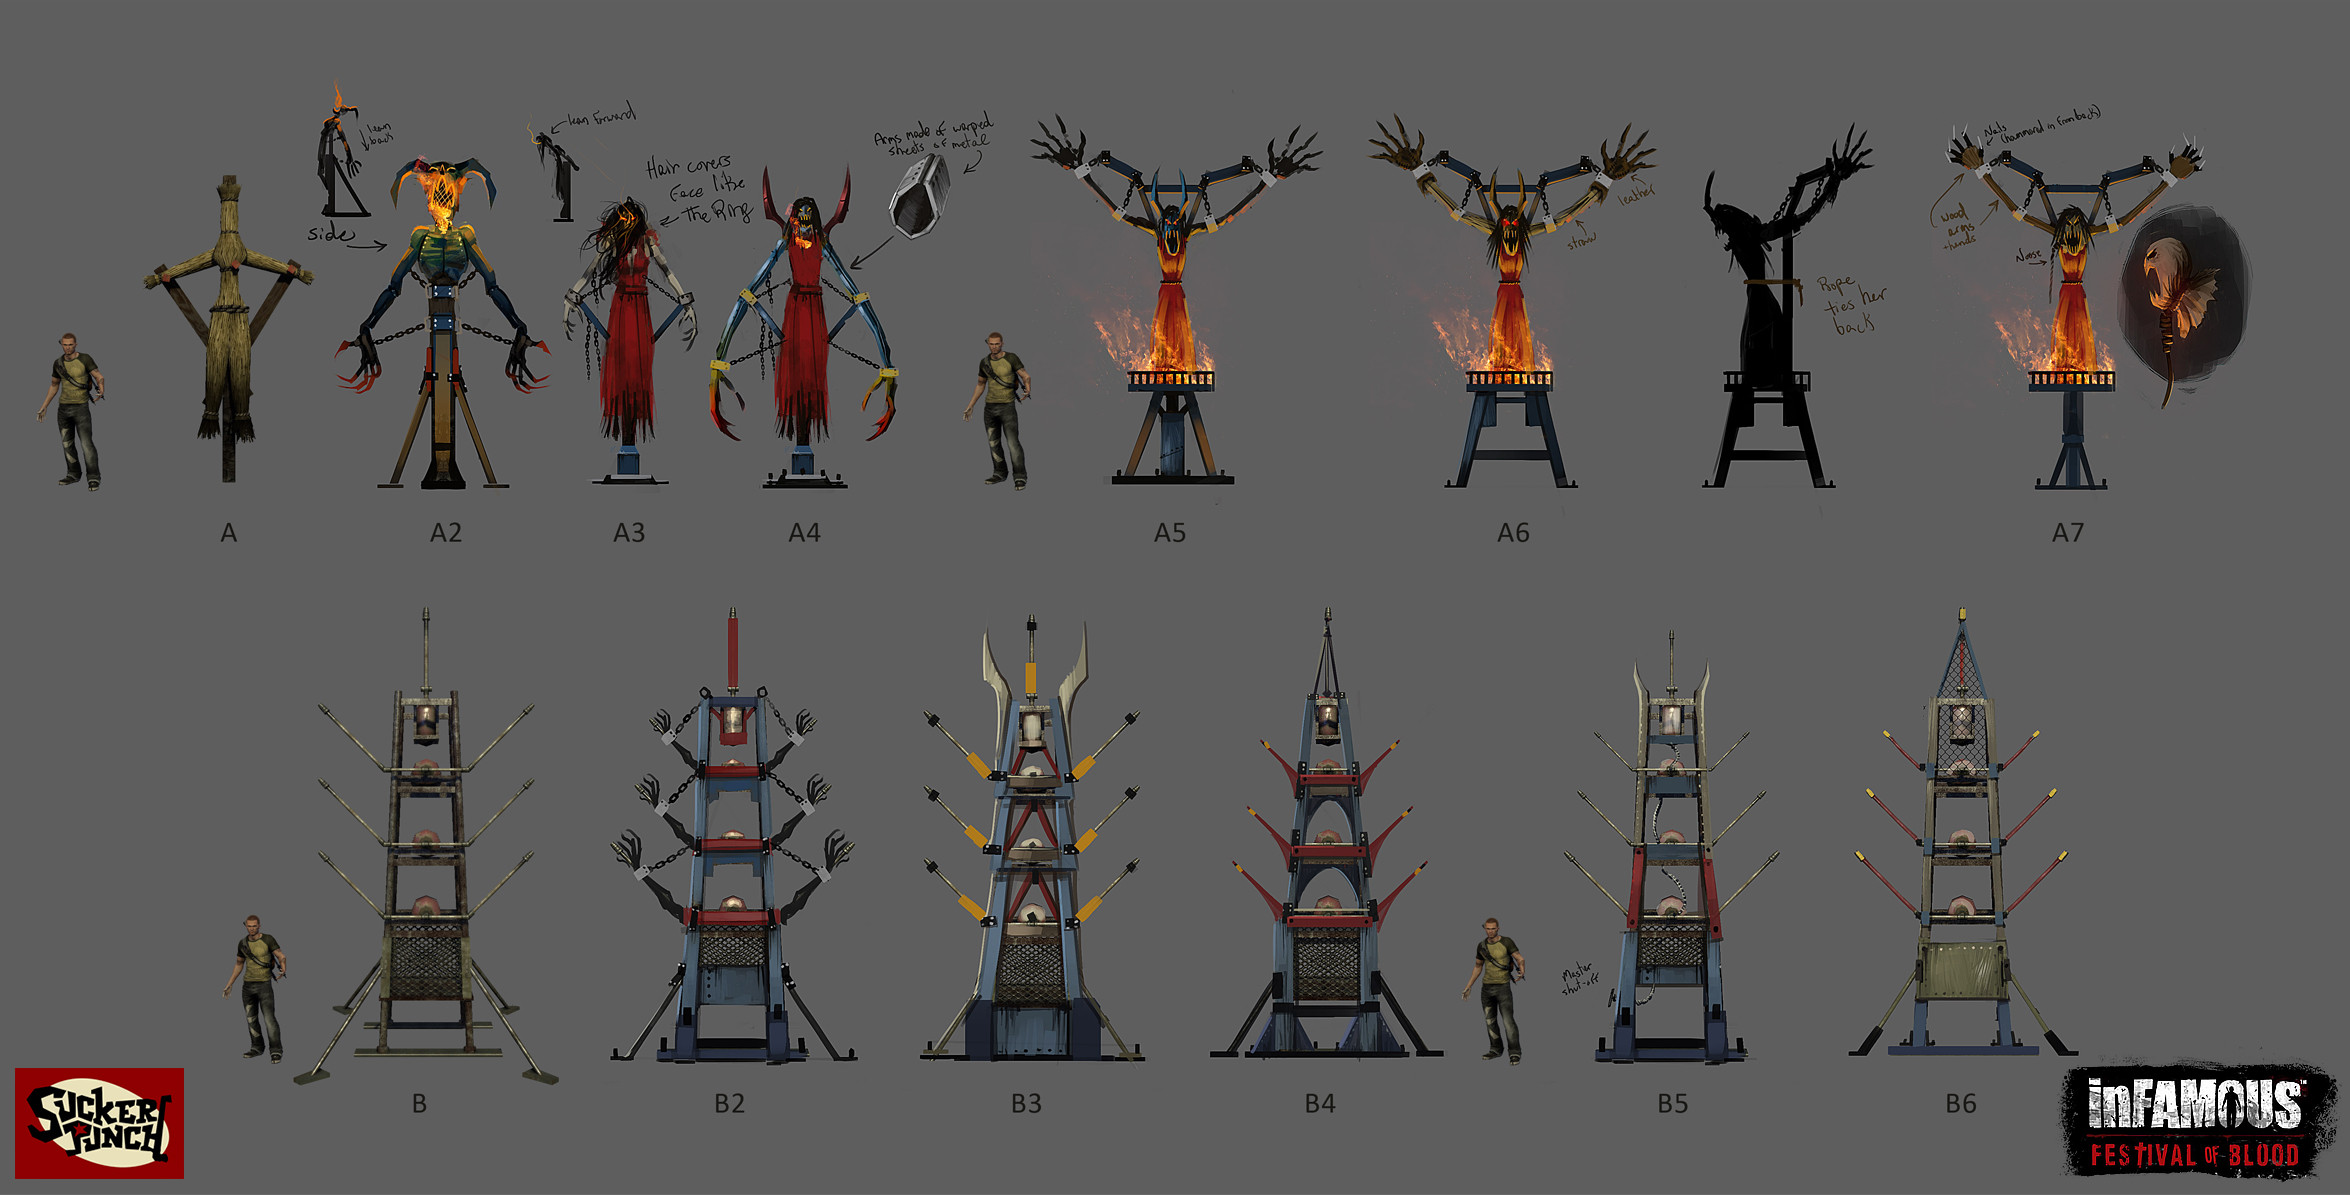 Concepts for plethora of event props placed around the city for the events in game